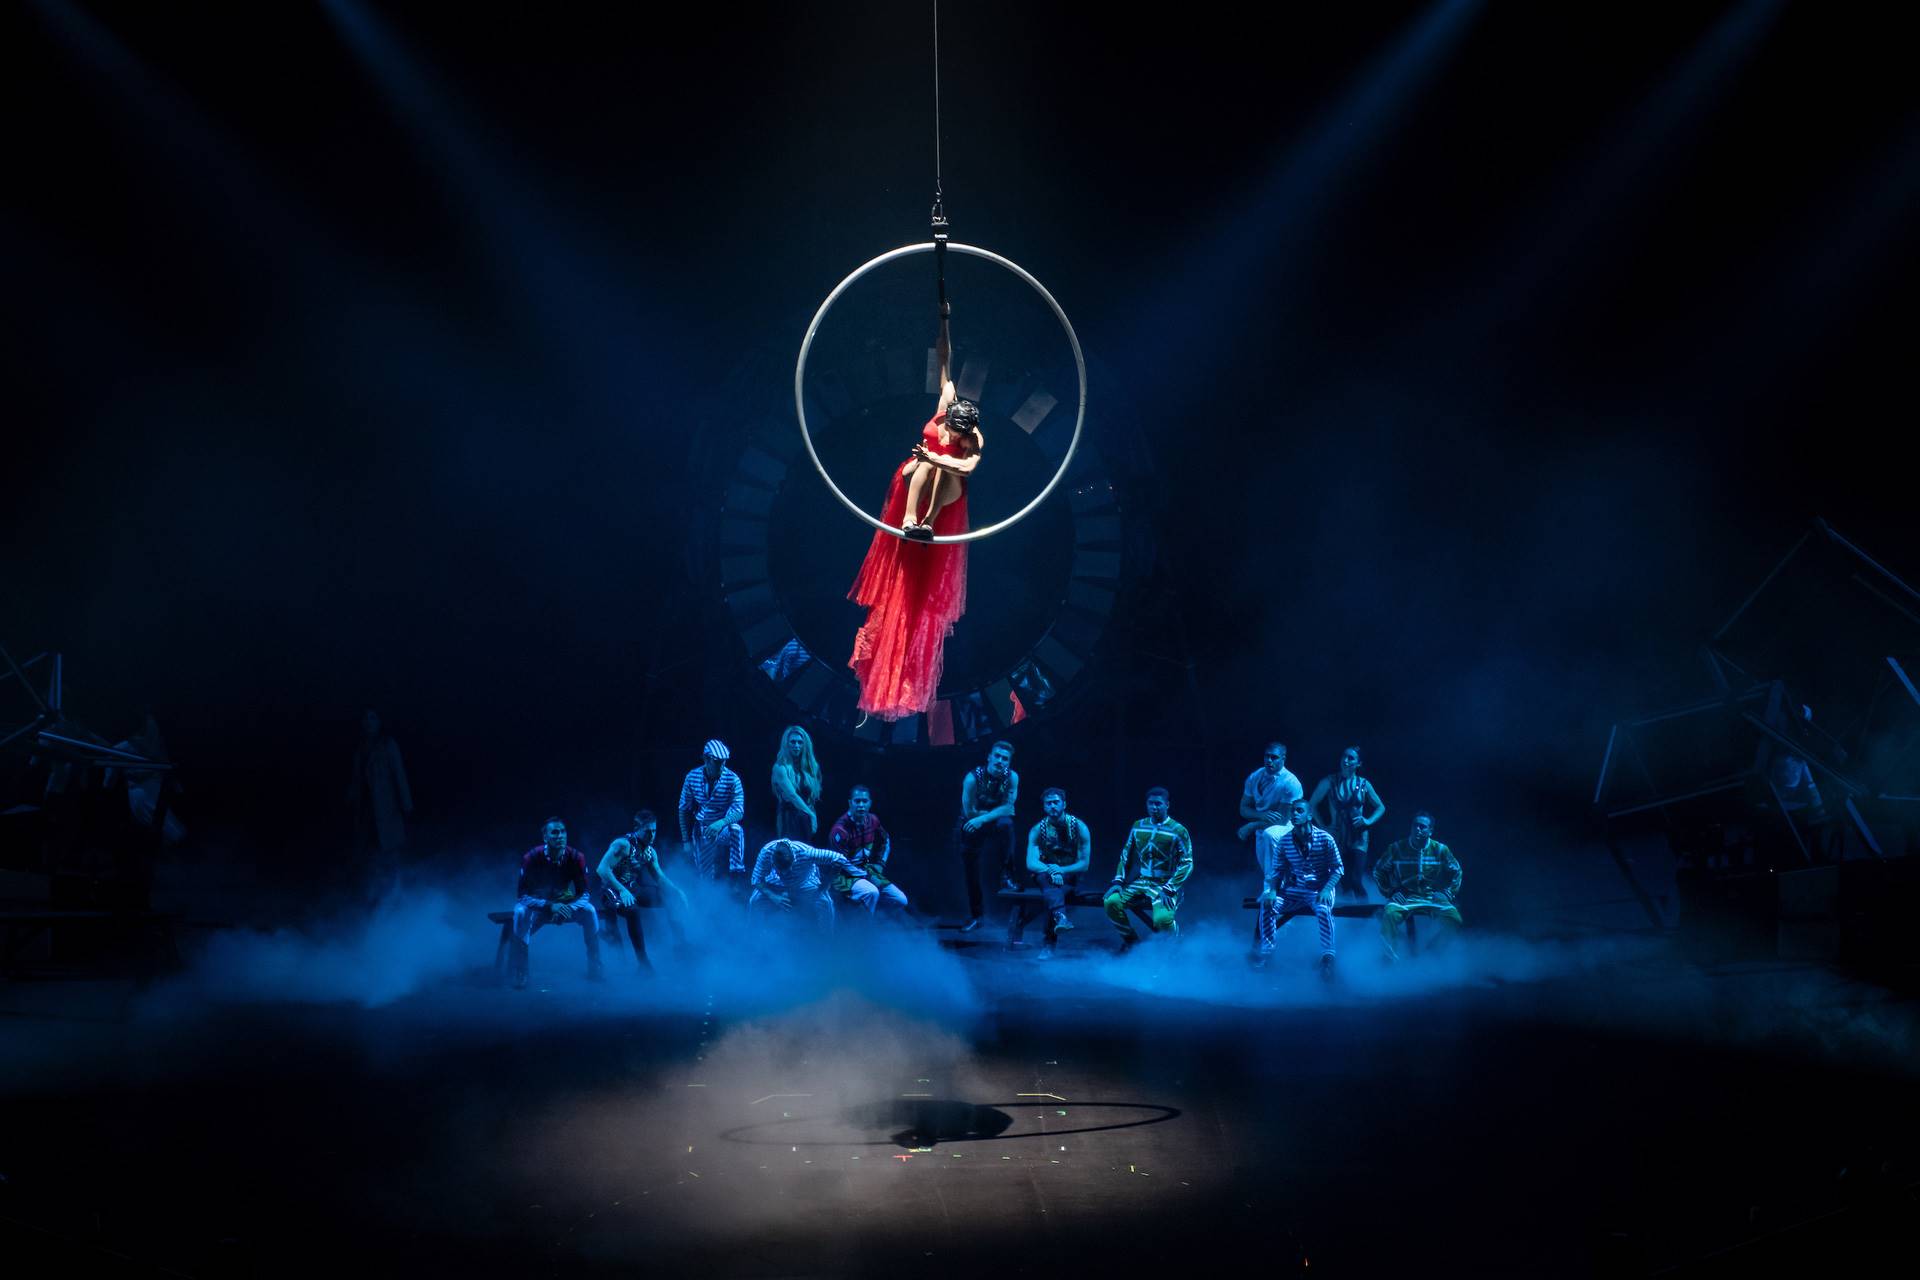 Rebel by Cirque du Soleil 2019: solo aerial balance and contortions